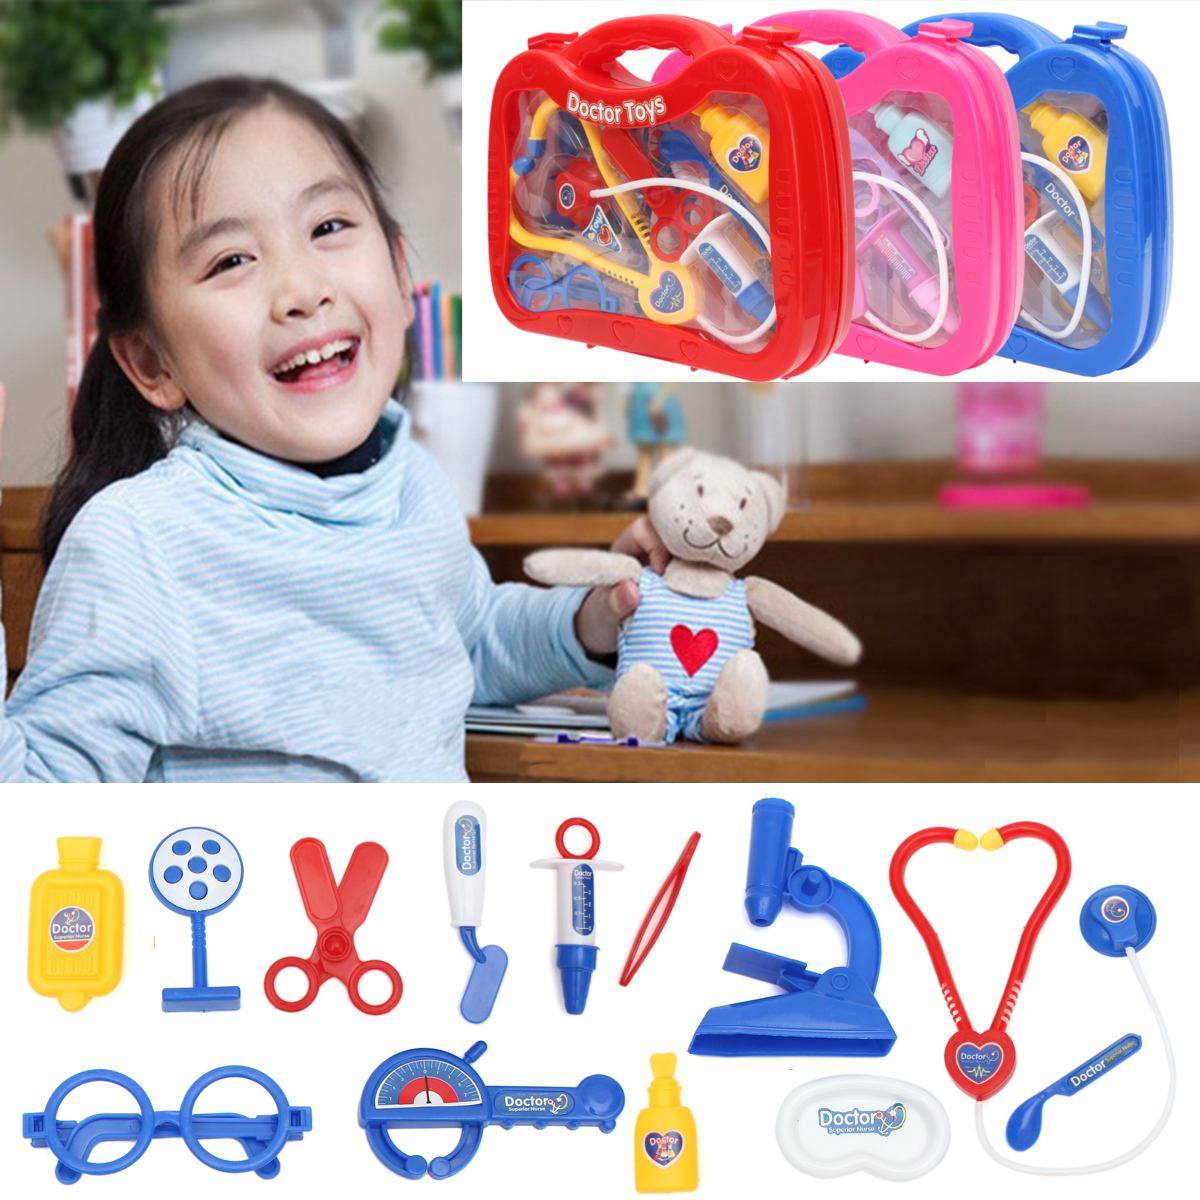 Kids Childrens Role Play Doctor Nurses Toy Medical Set Kit Gift Toys 9